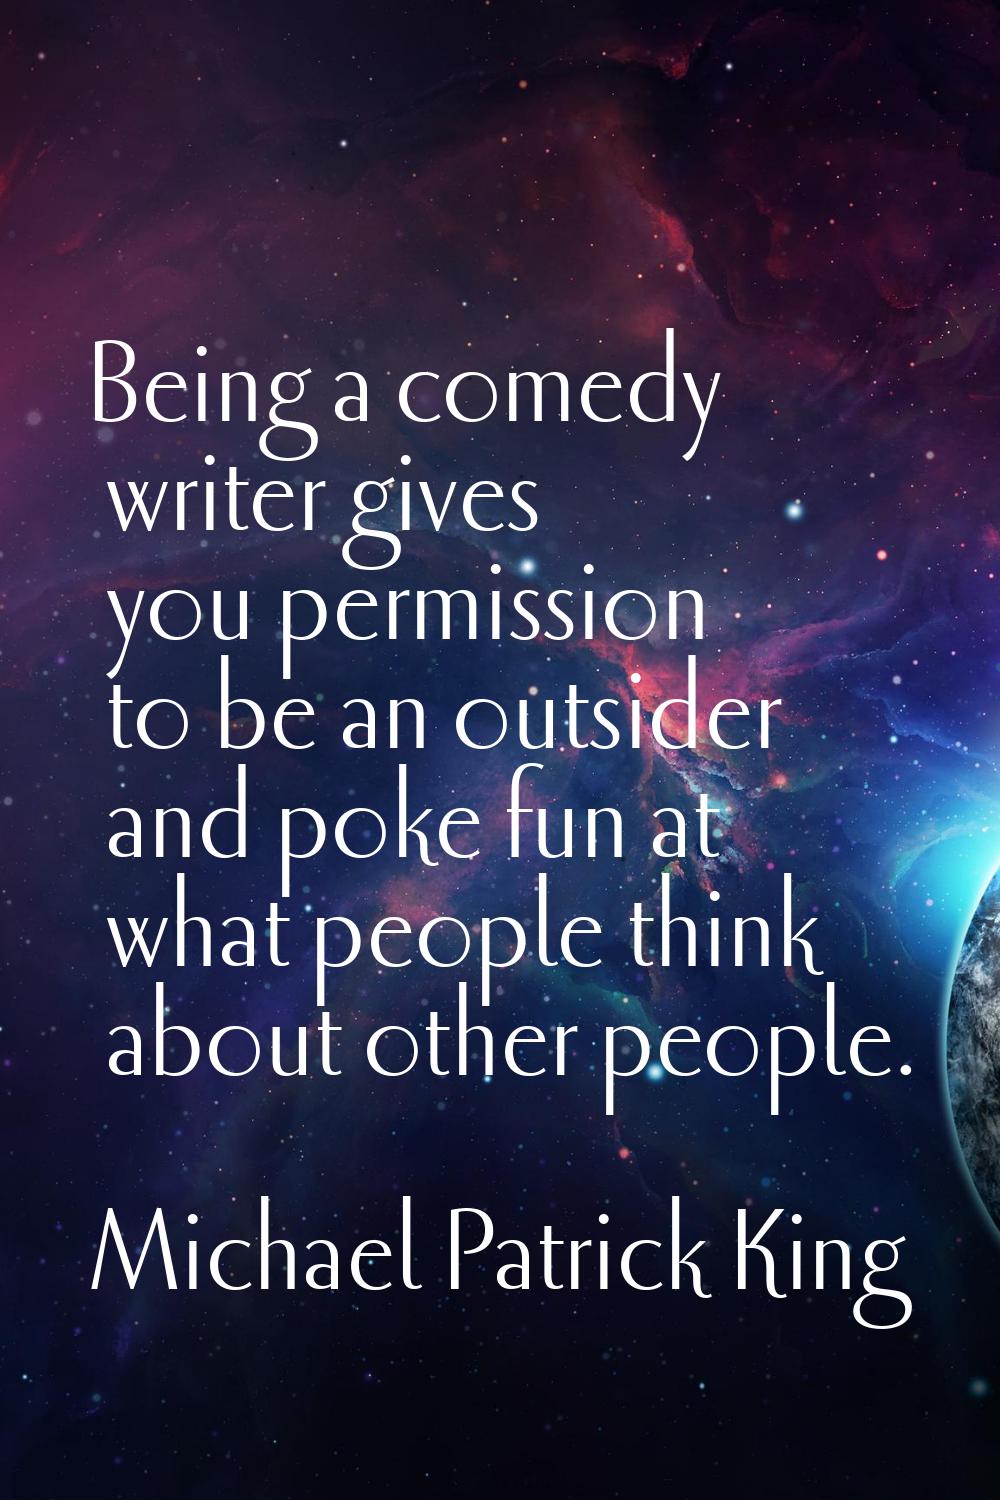 Being a comedy writer gives you permission to be an outsider and poke fun at what people think abou